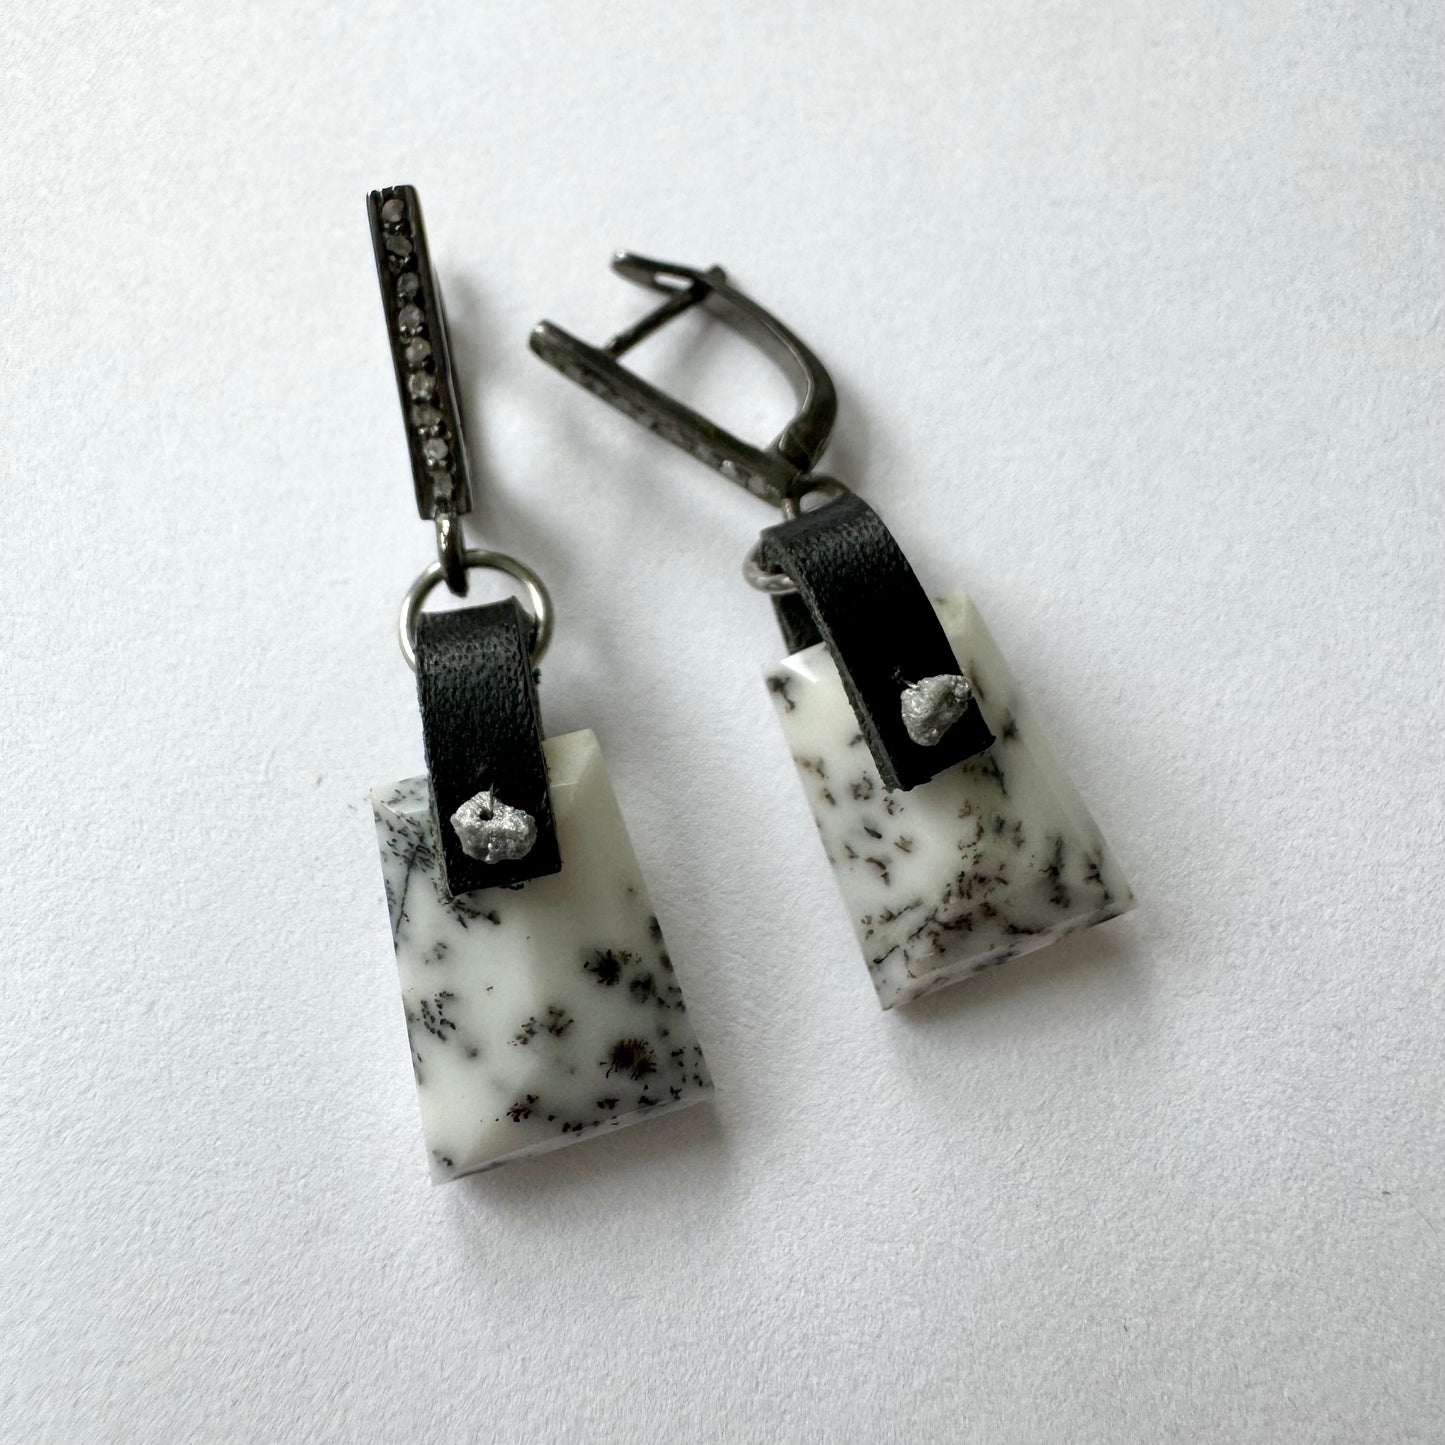 Dendritic Opal Earrings with pave diamonds set oxidized sterling silver OOAK (one of a kind)